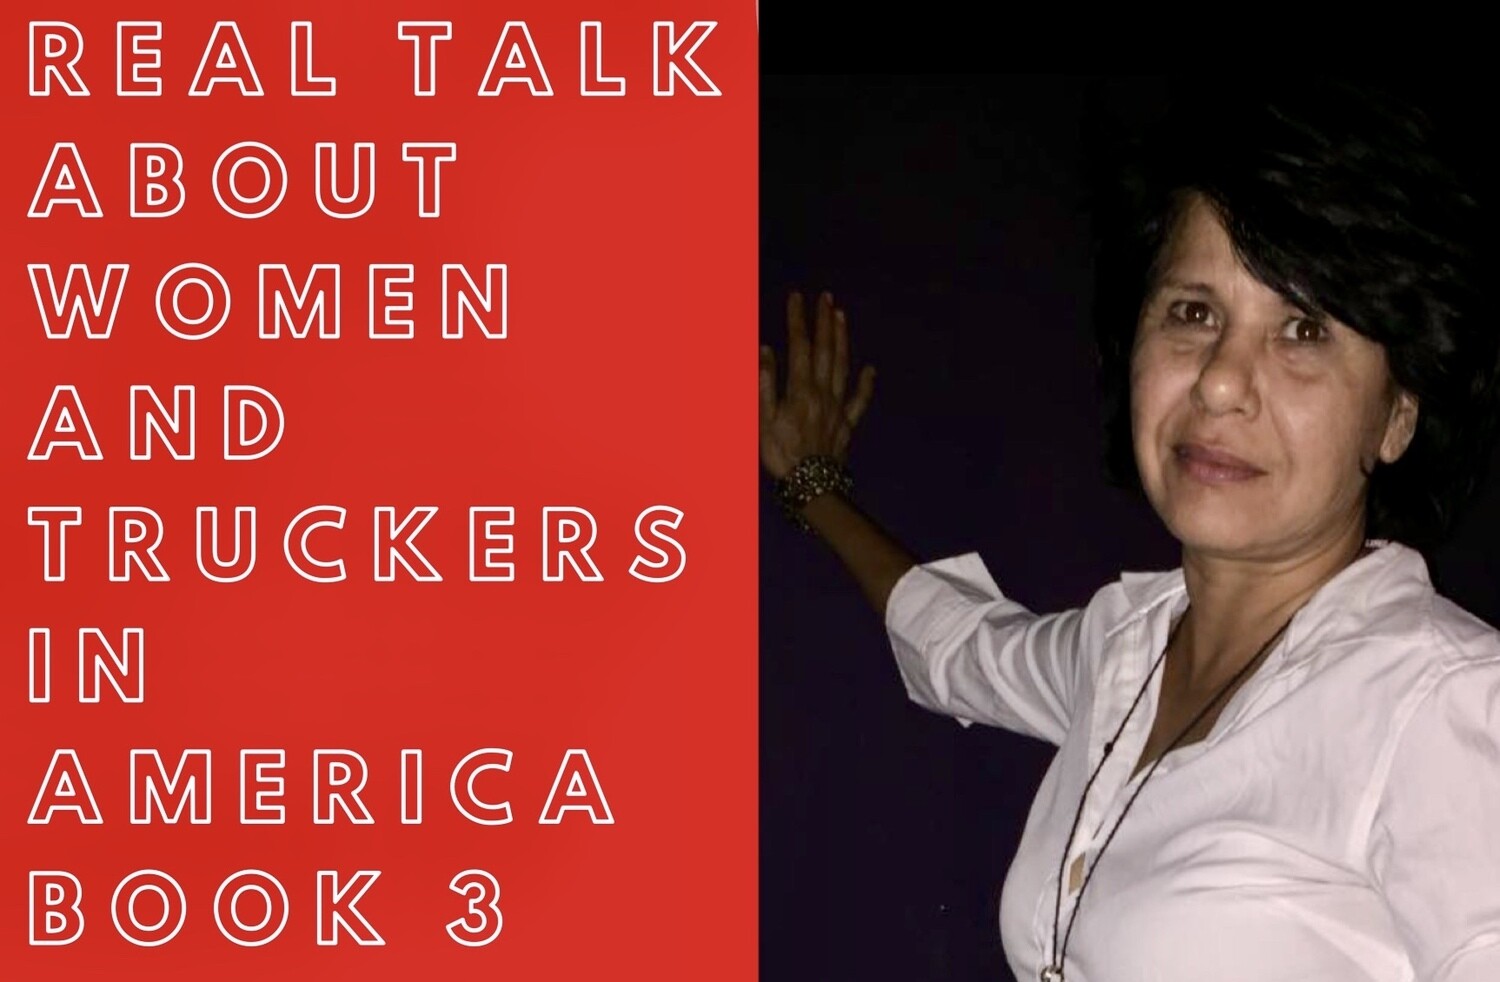 Real Talk About Women And Truckers In America Book 3